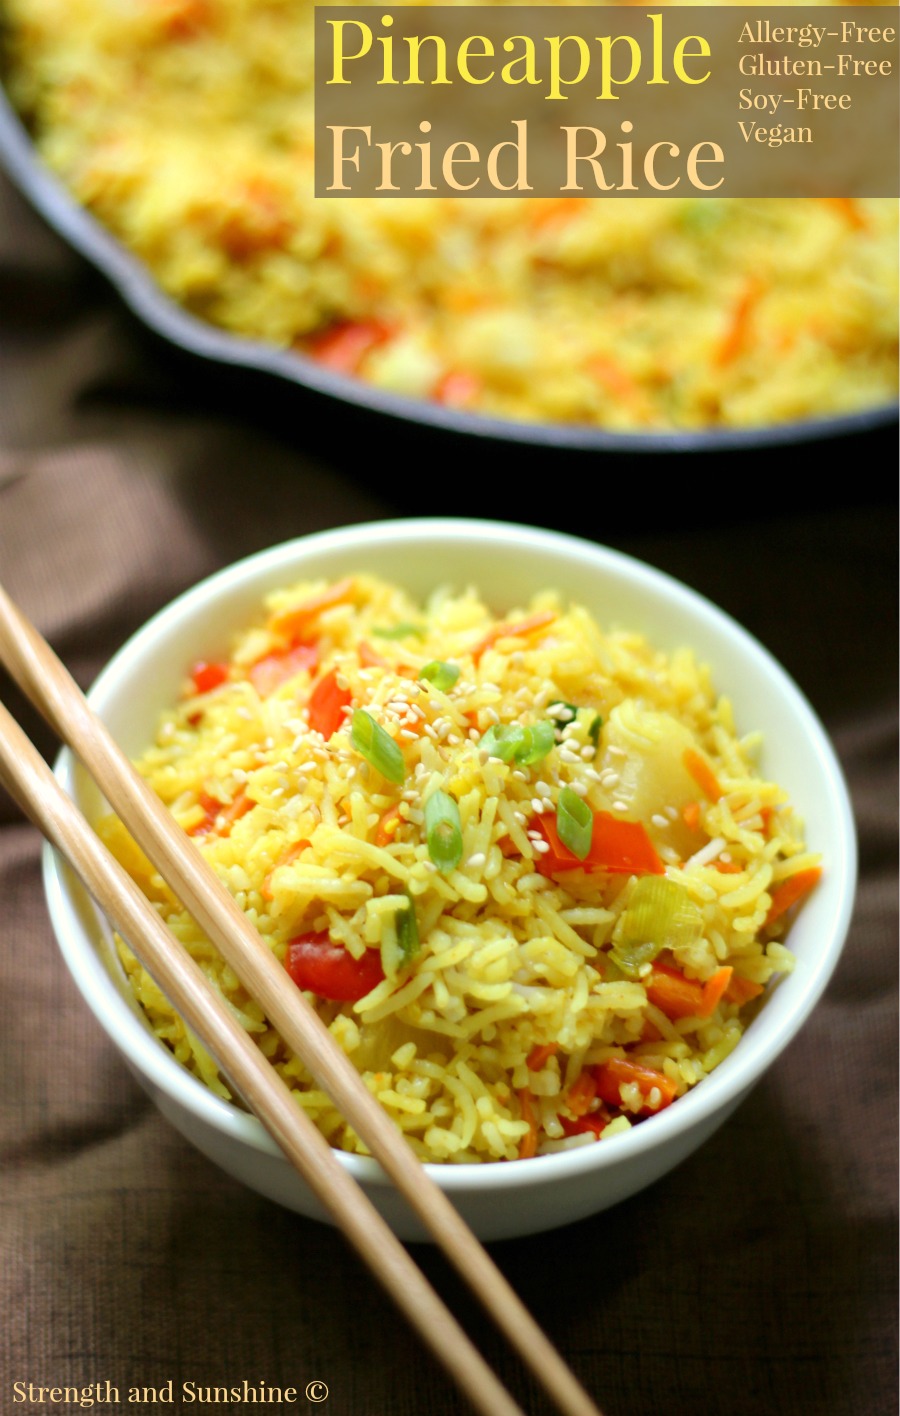 Gluten-Free Pineapple Fried Rice (Allergy-Free, Vegan) | Strength and Sunshine @RebeccaGF666 Super easy gluten-free, soy-free, allergy-free, vegan fried rice at home! Pineapple Fried Rice that's made on the stove in a cast iron skillet in just a few minutes! A great healthy recipe for lunch, dinner, and some fantastic leftovers!